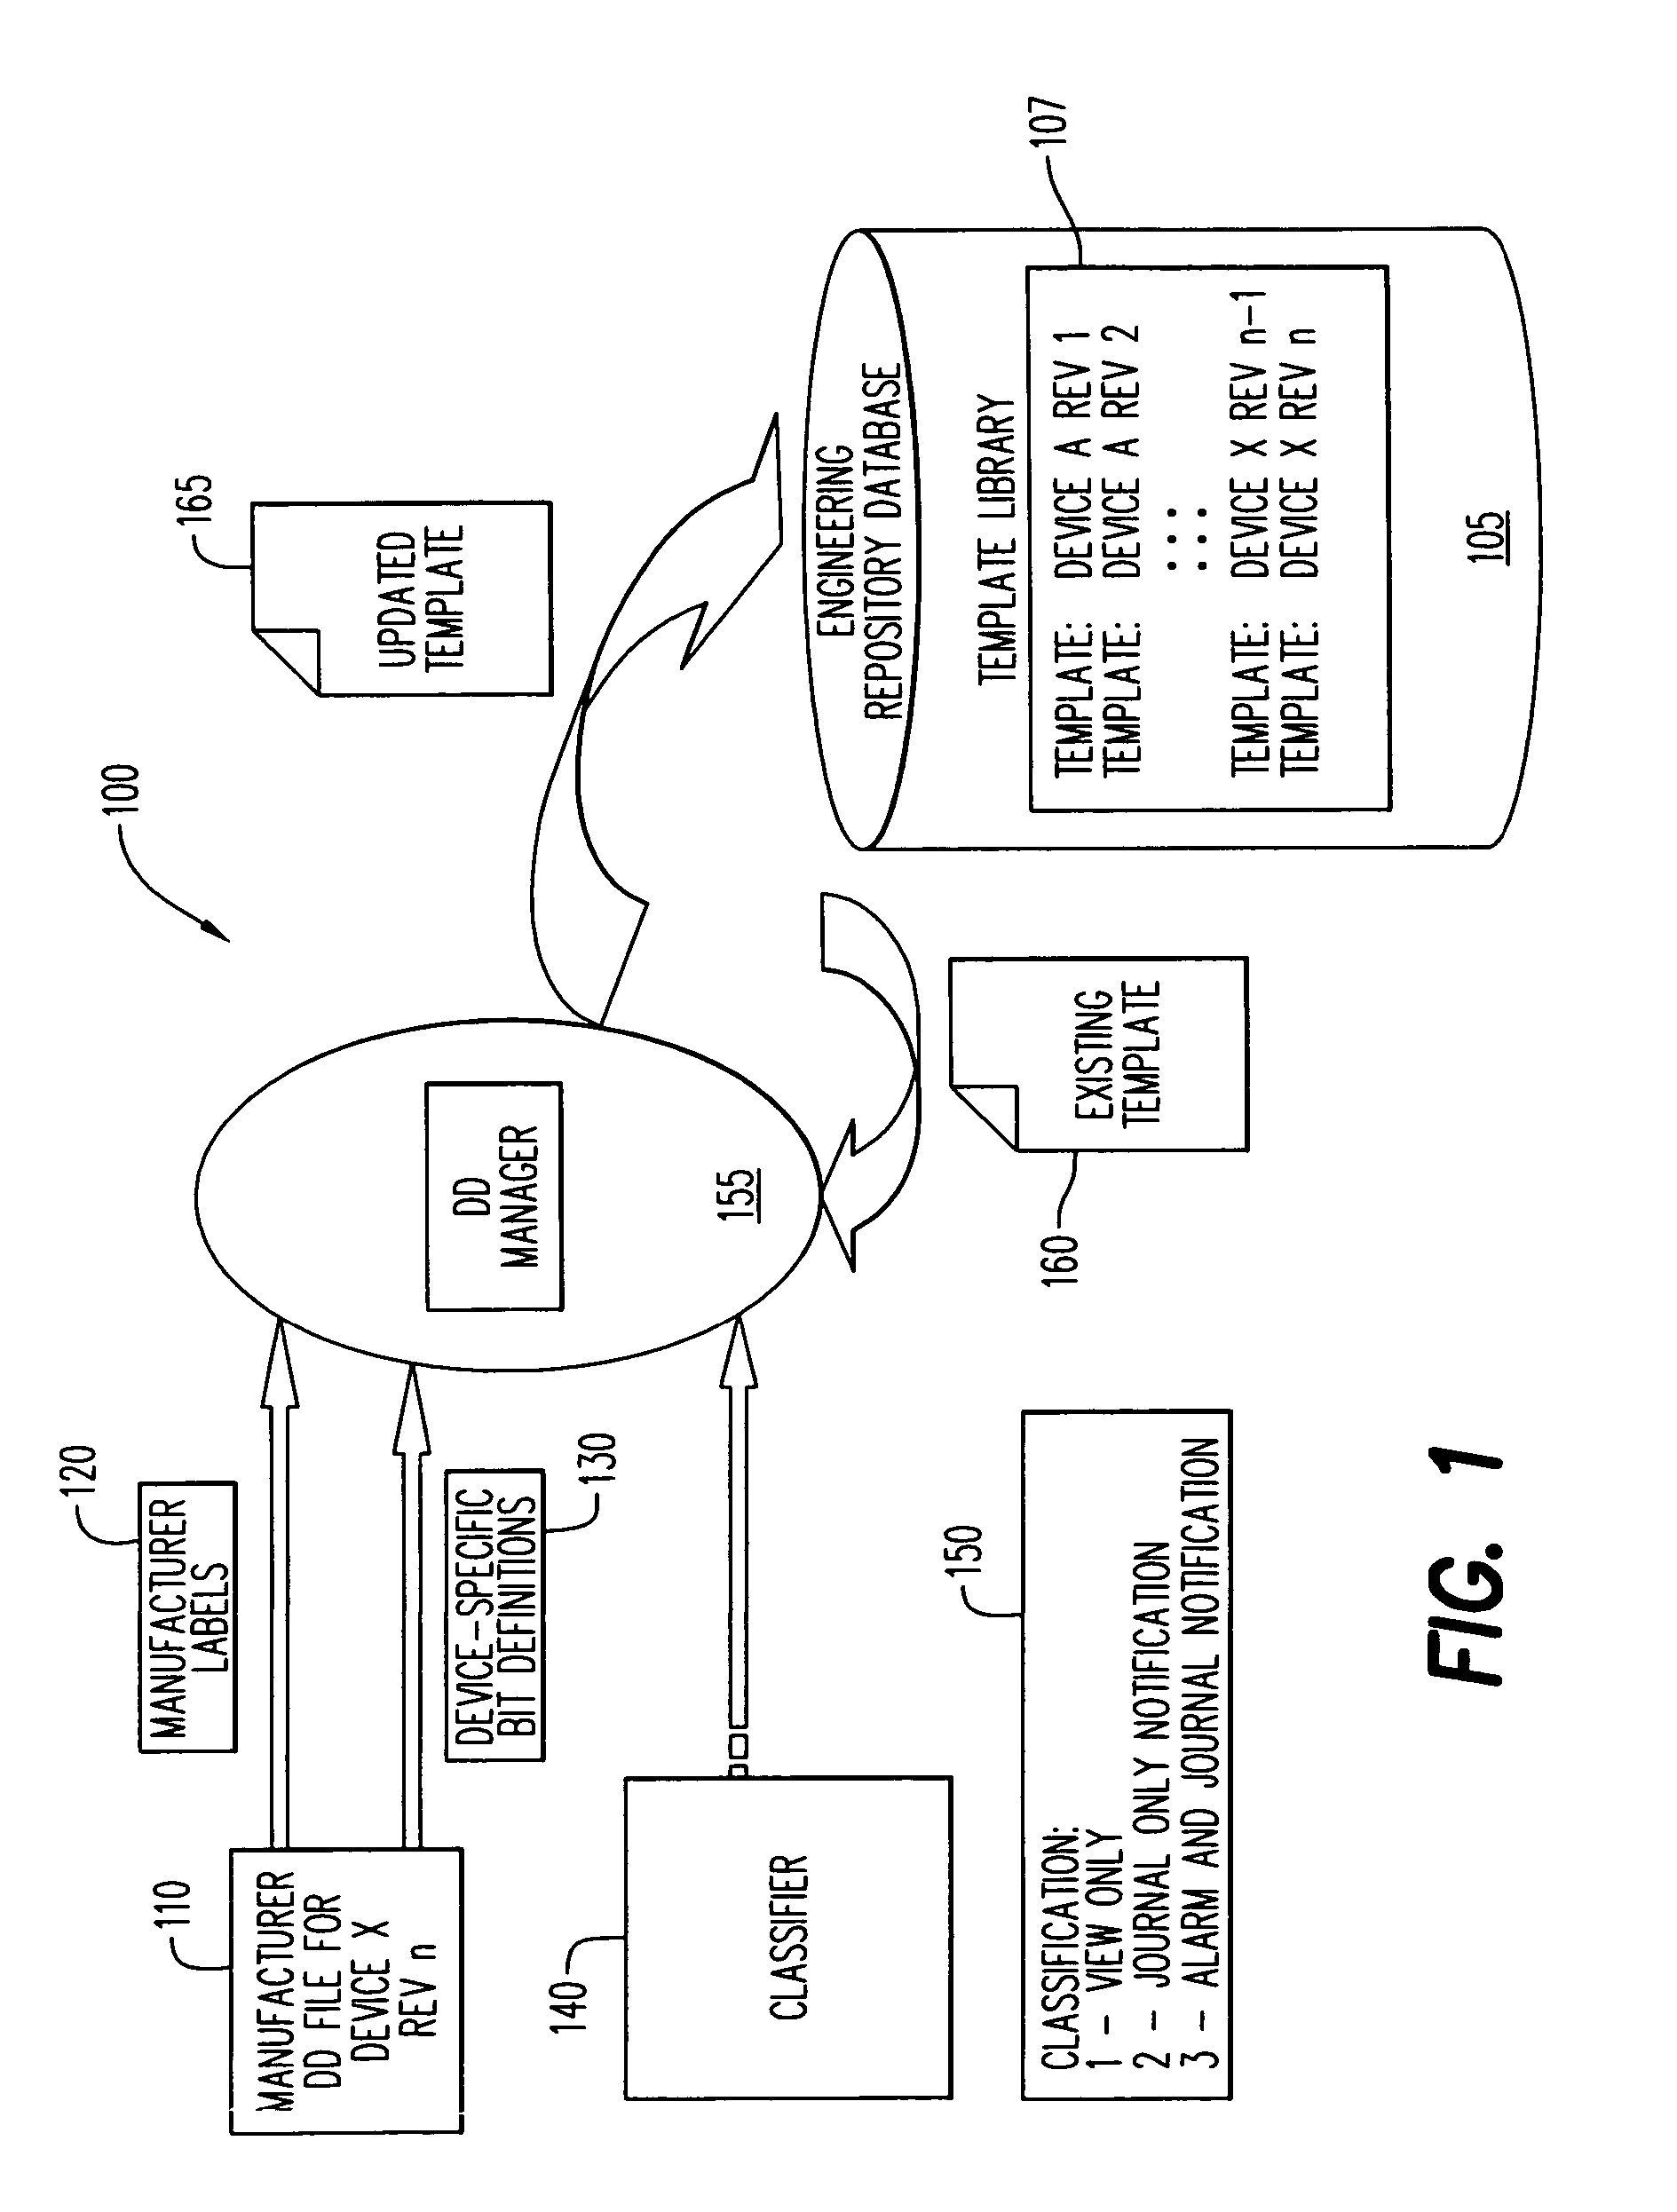 System and method for communicating device descriptions between a control system and a plurality of controlled devices